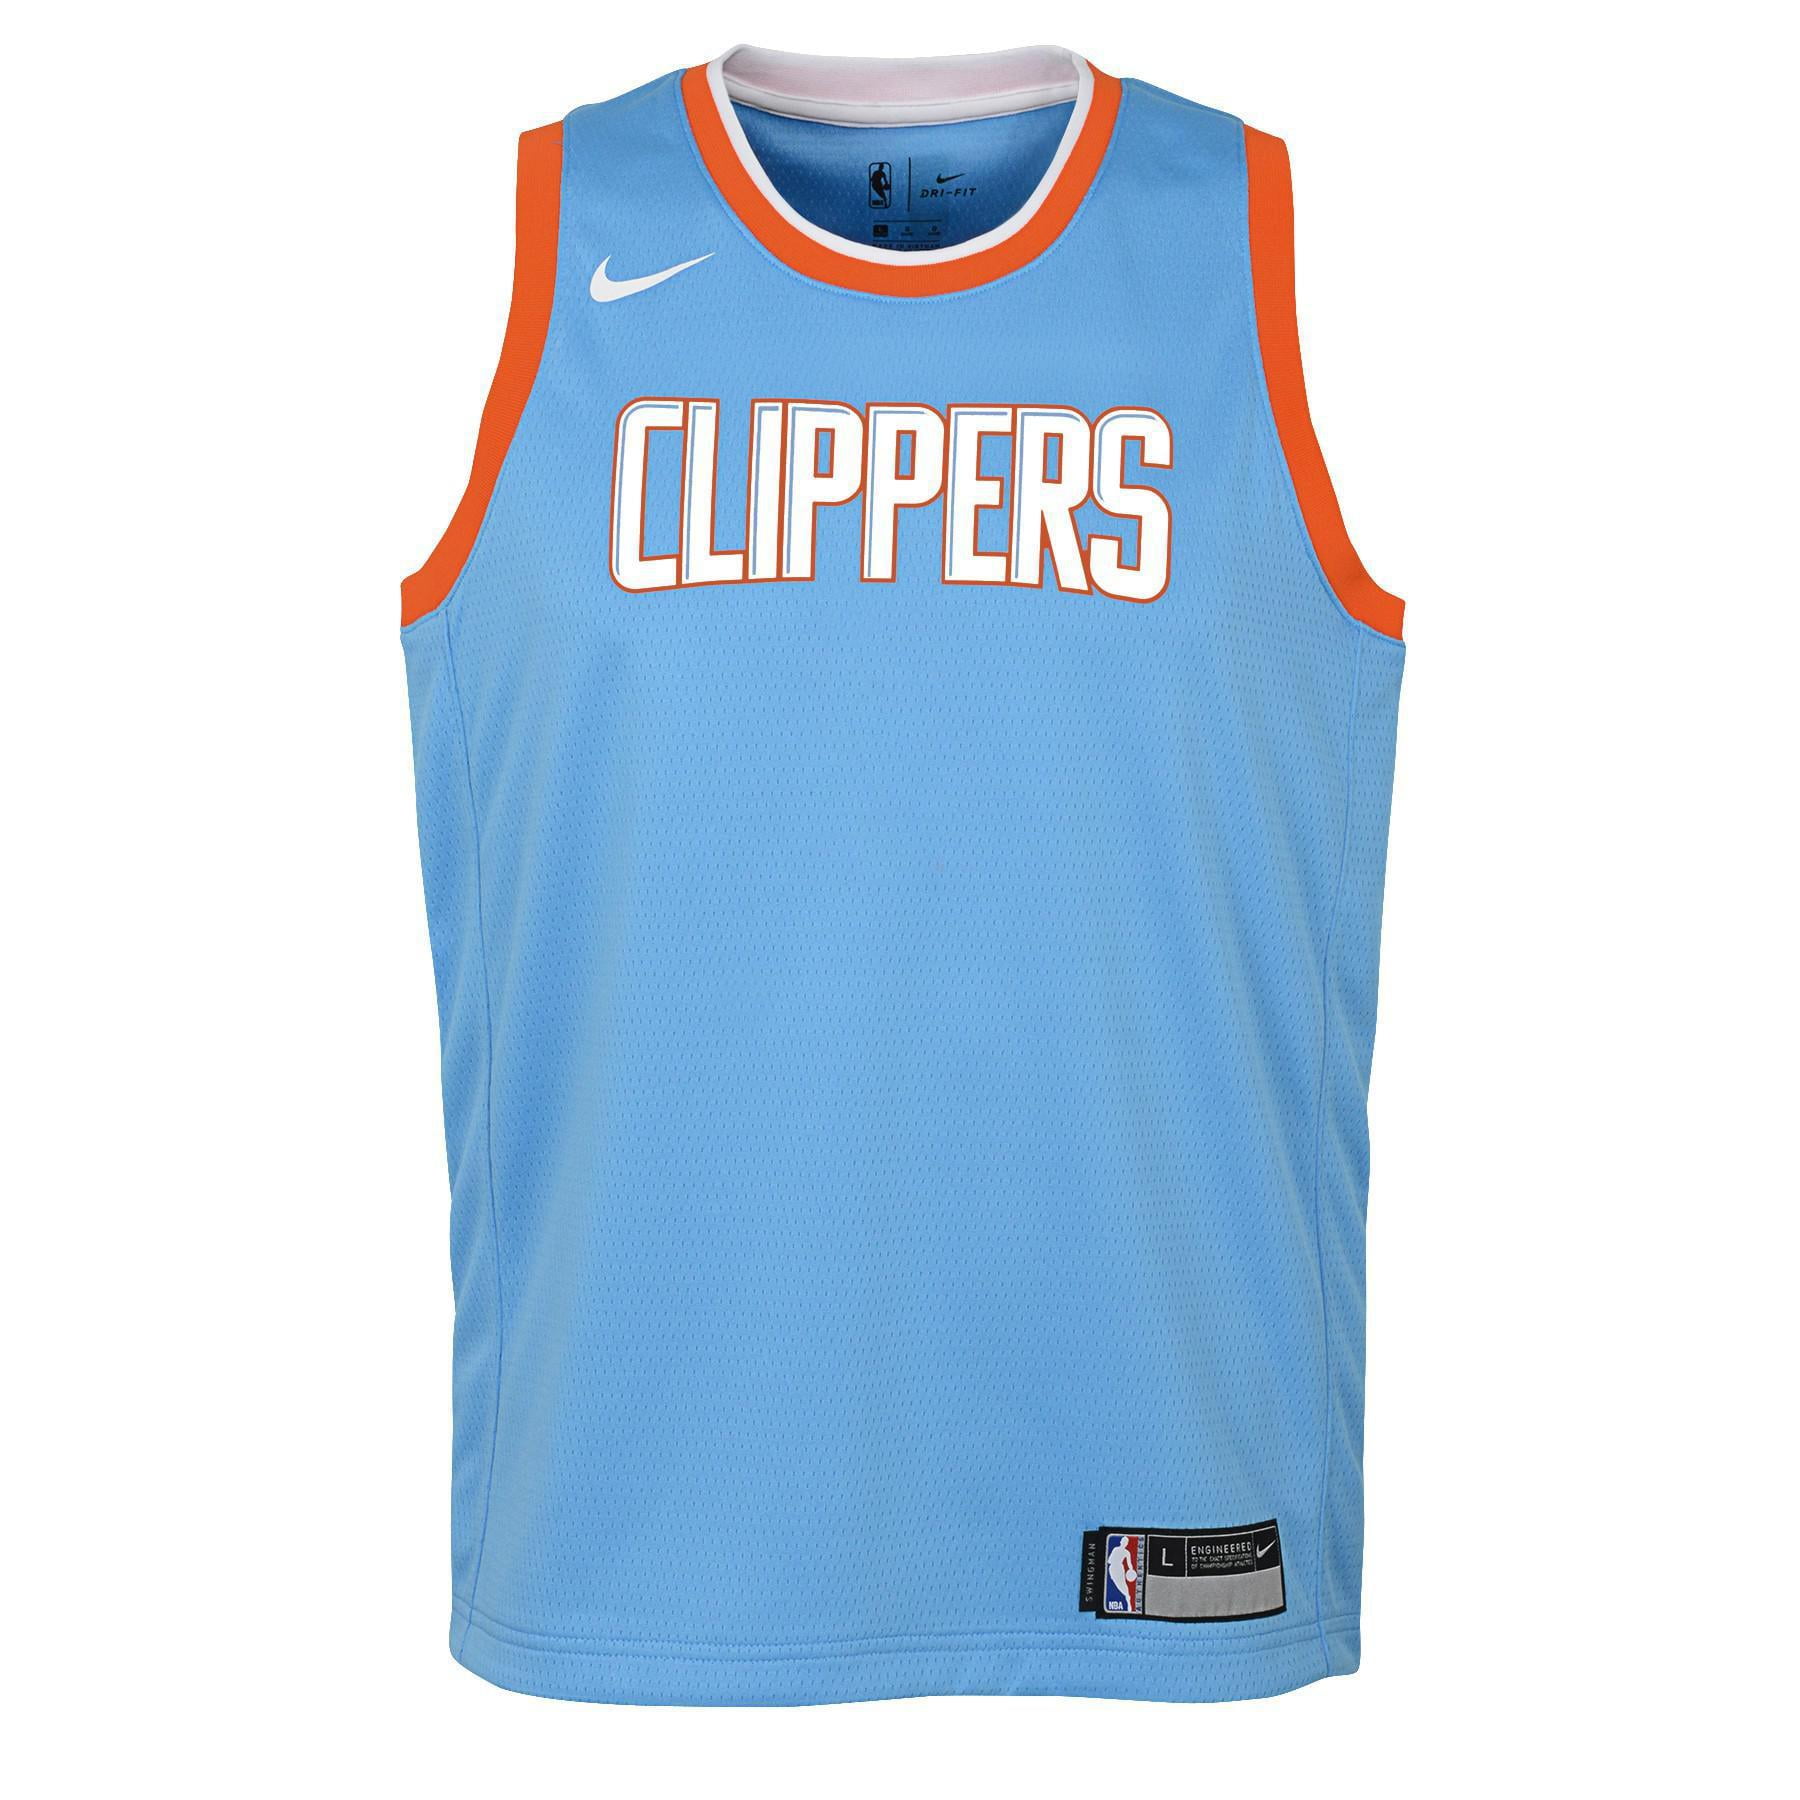 Los Angeles Clippers T-Shirts in Los Angeles Clippers Team Shop